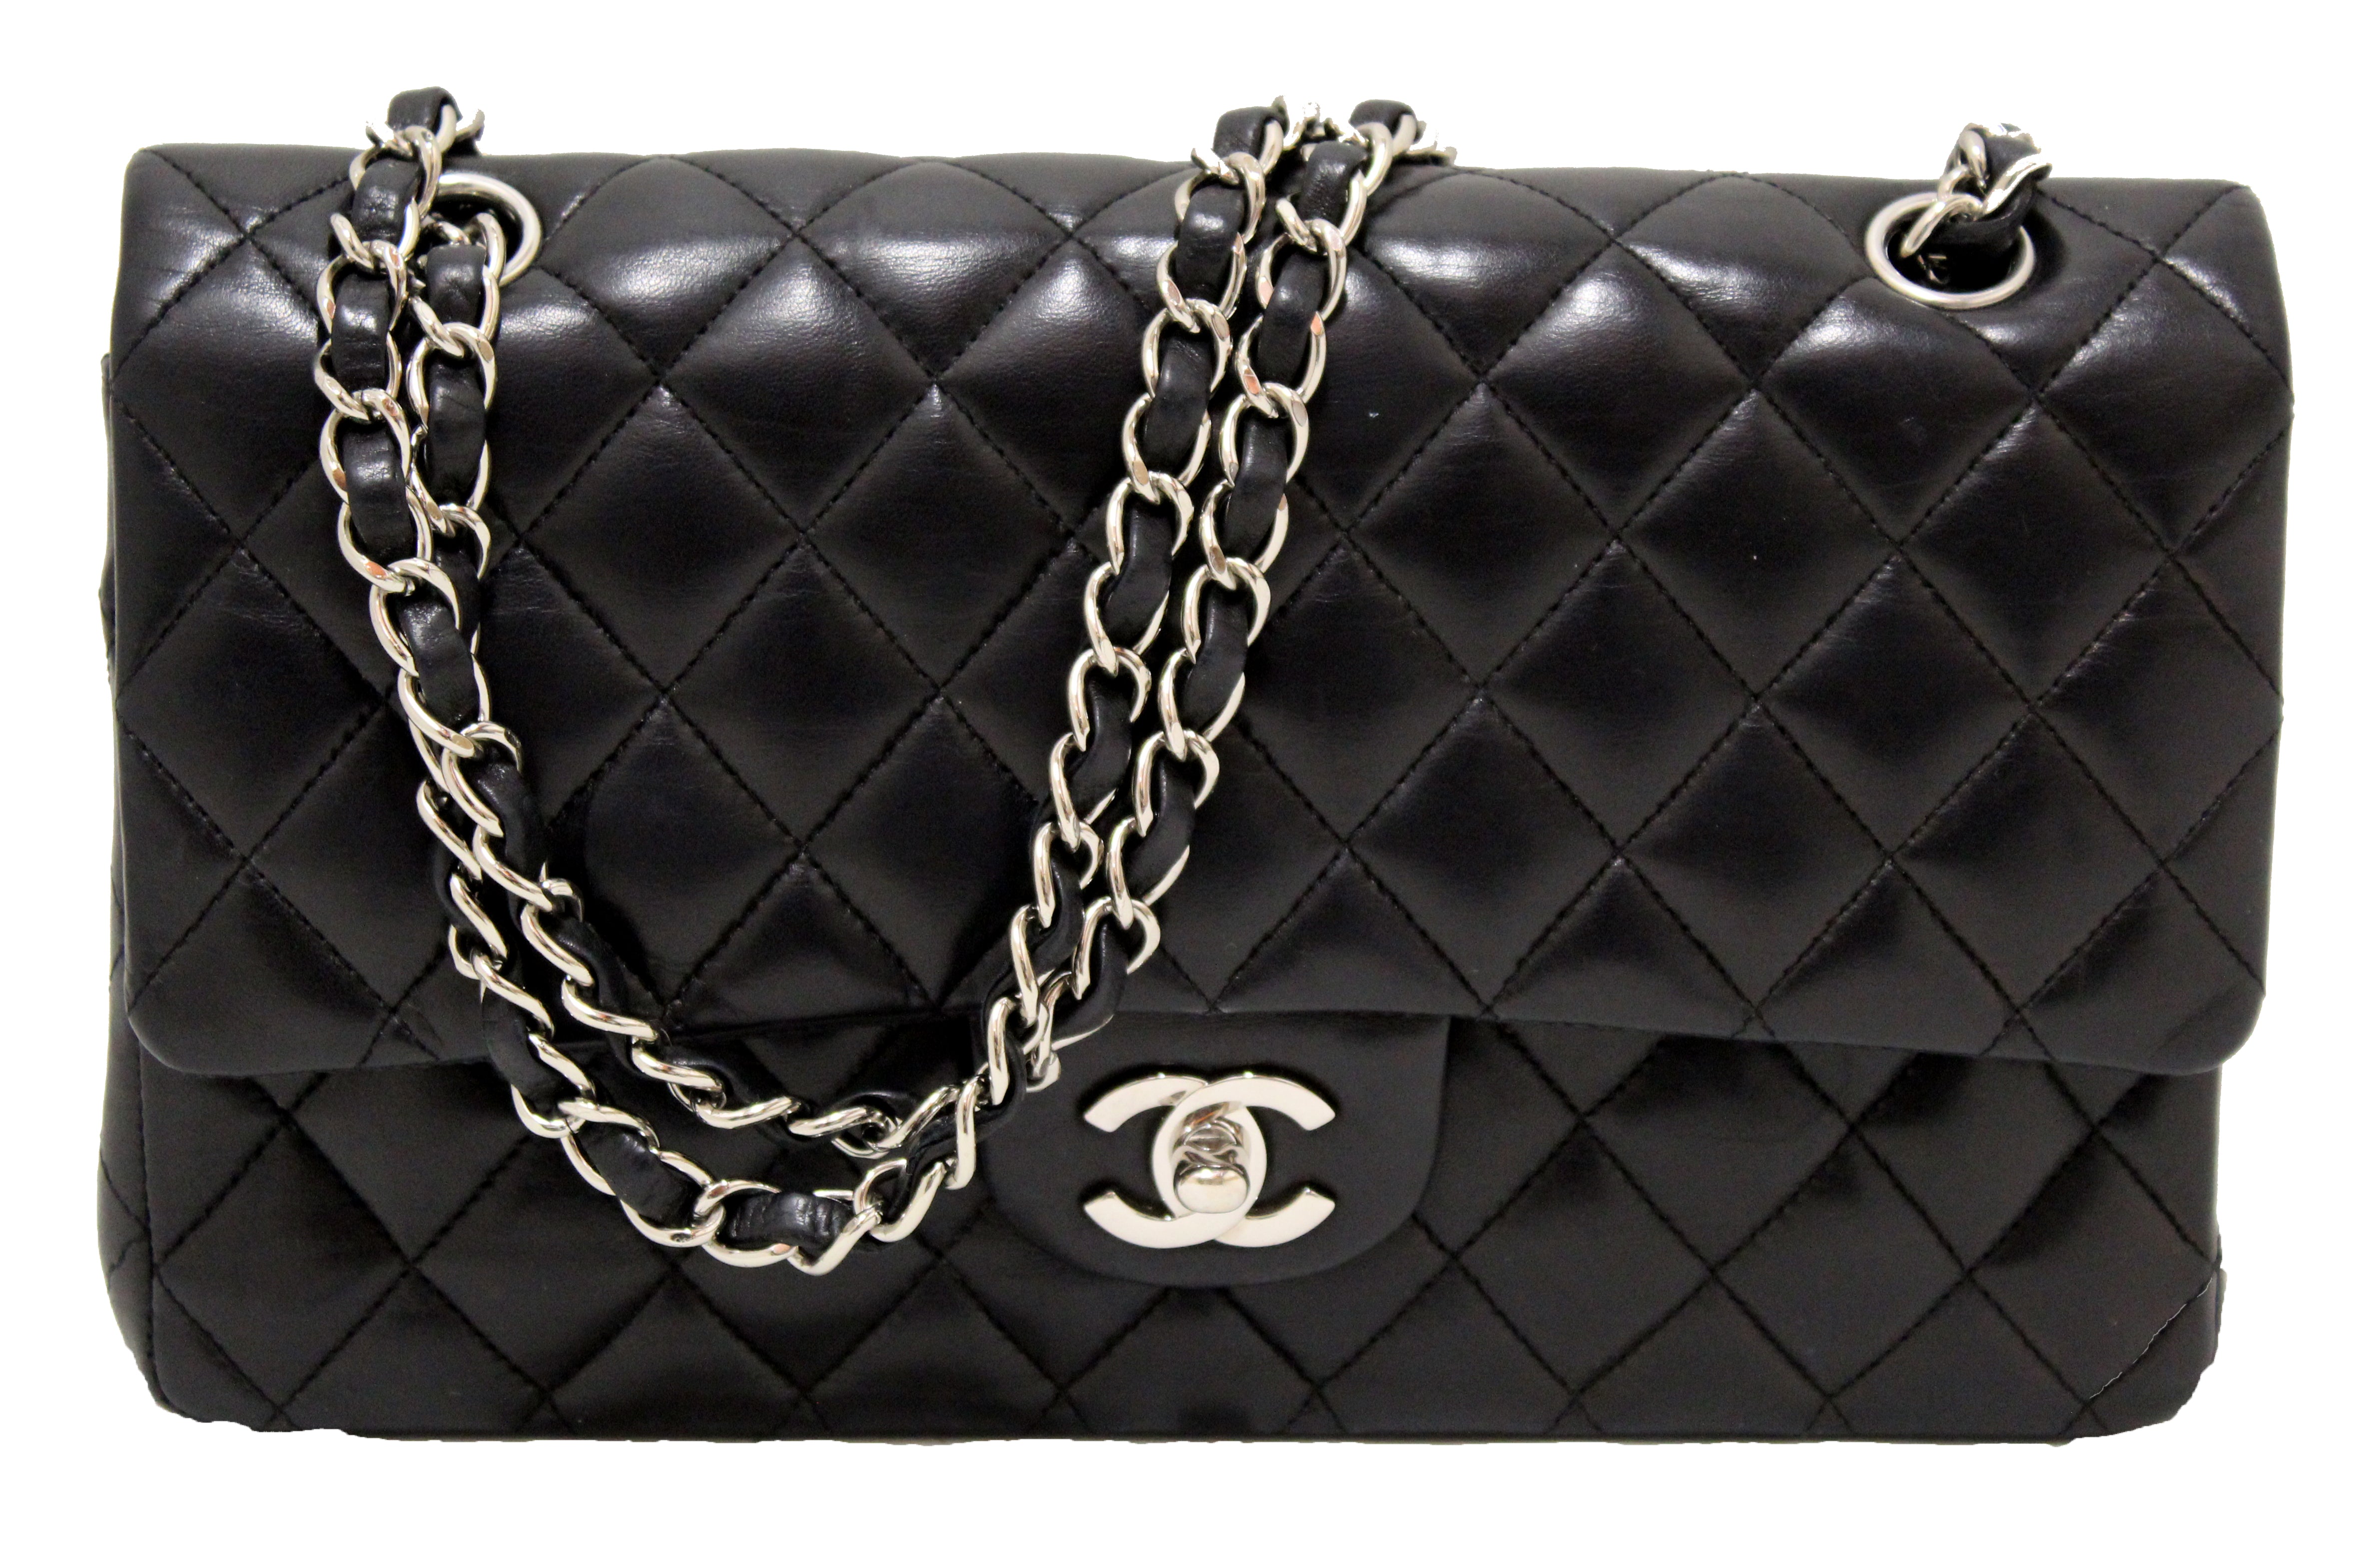 Authentic Chanel Black Quilted Lambskin Leather Classic Medium Double Flap Bag